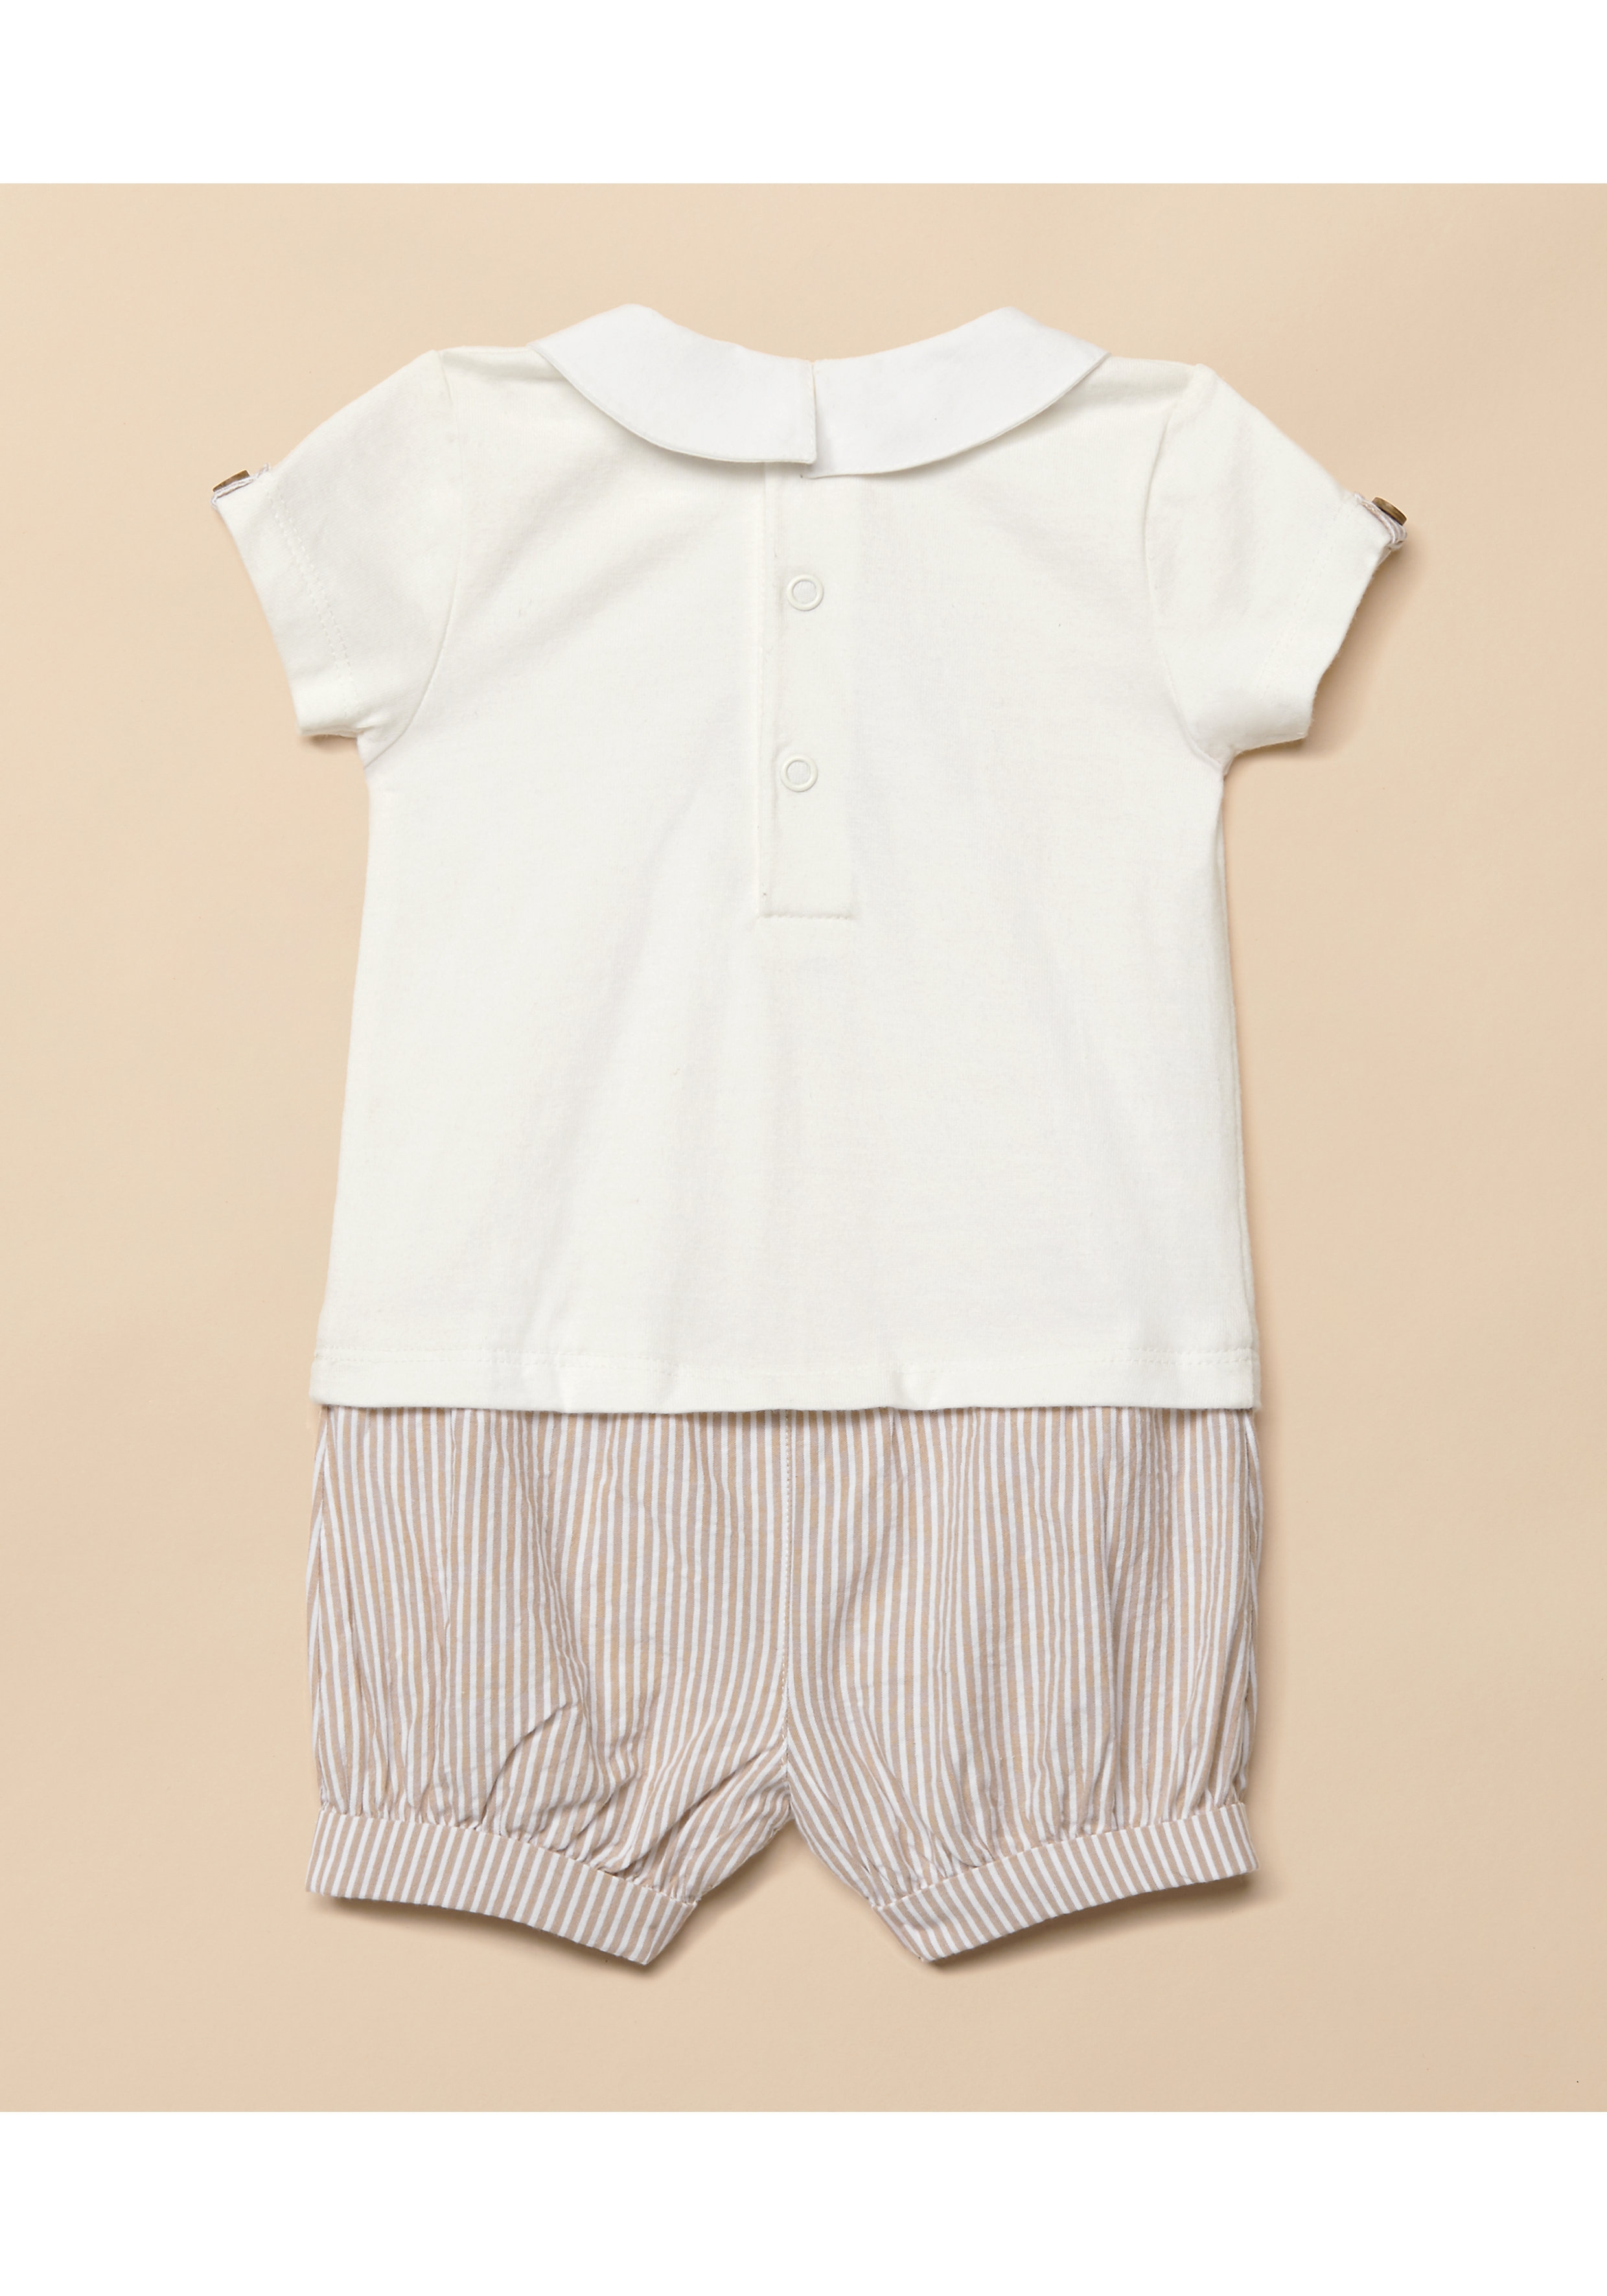 Mothercare | Boys Half Sleeves Embroidered Romper - White 1